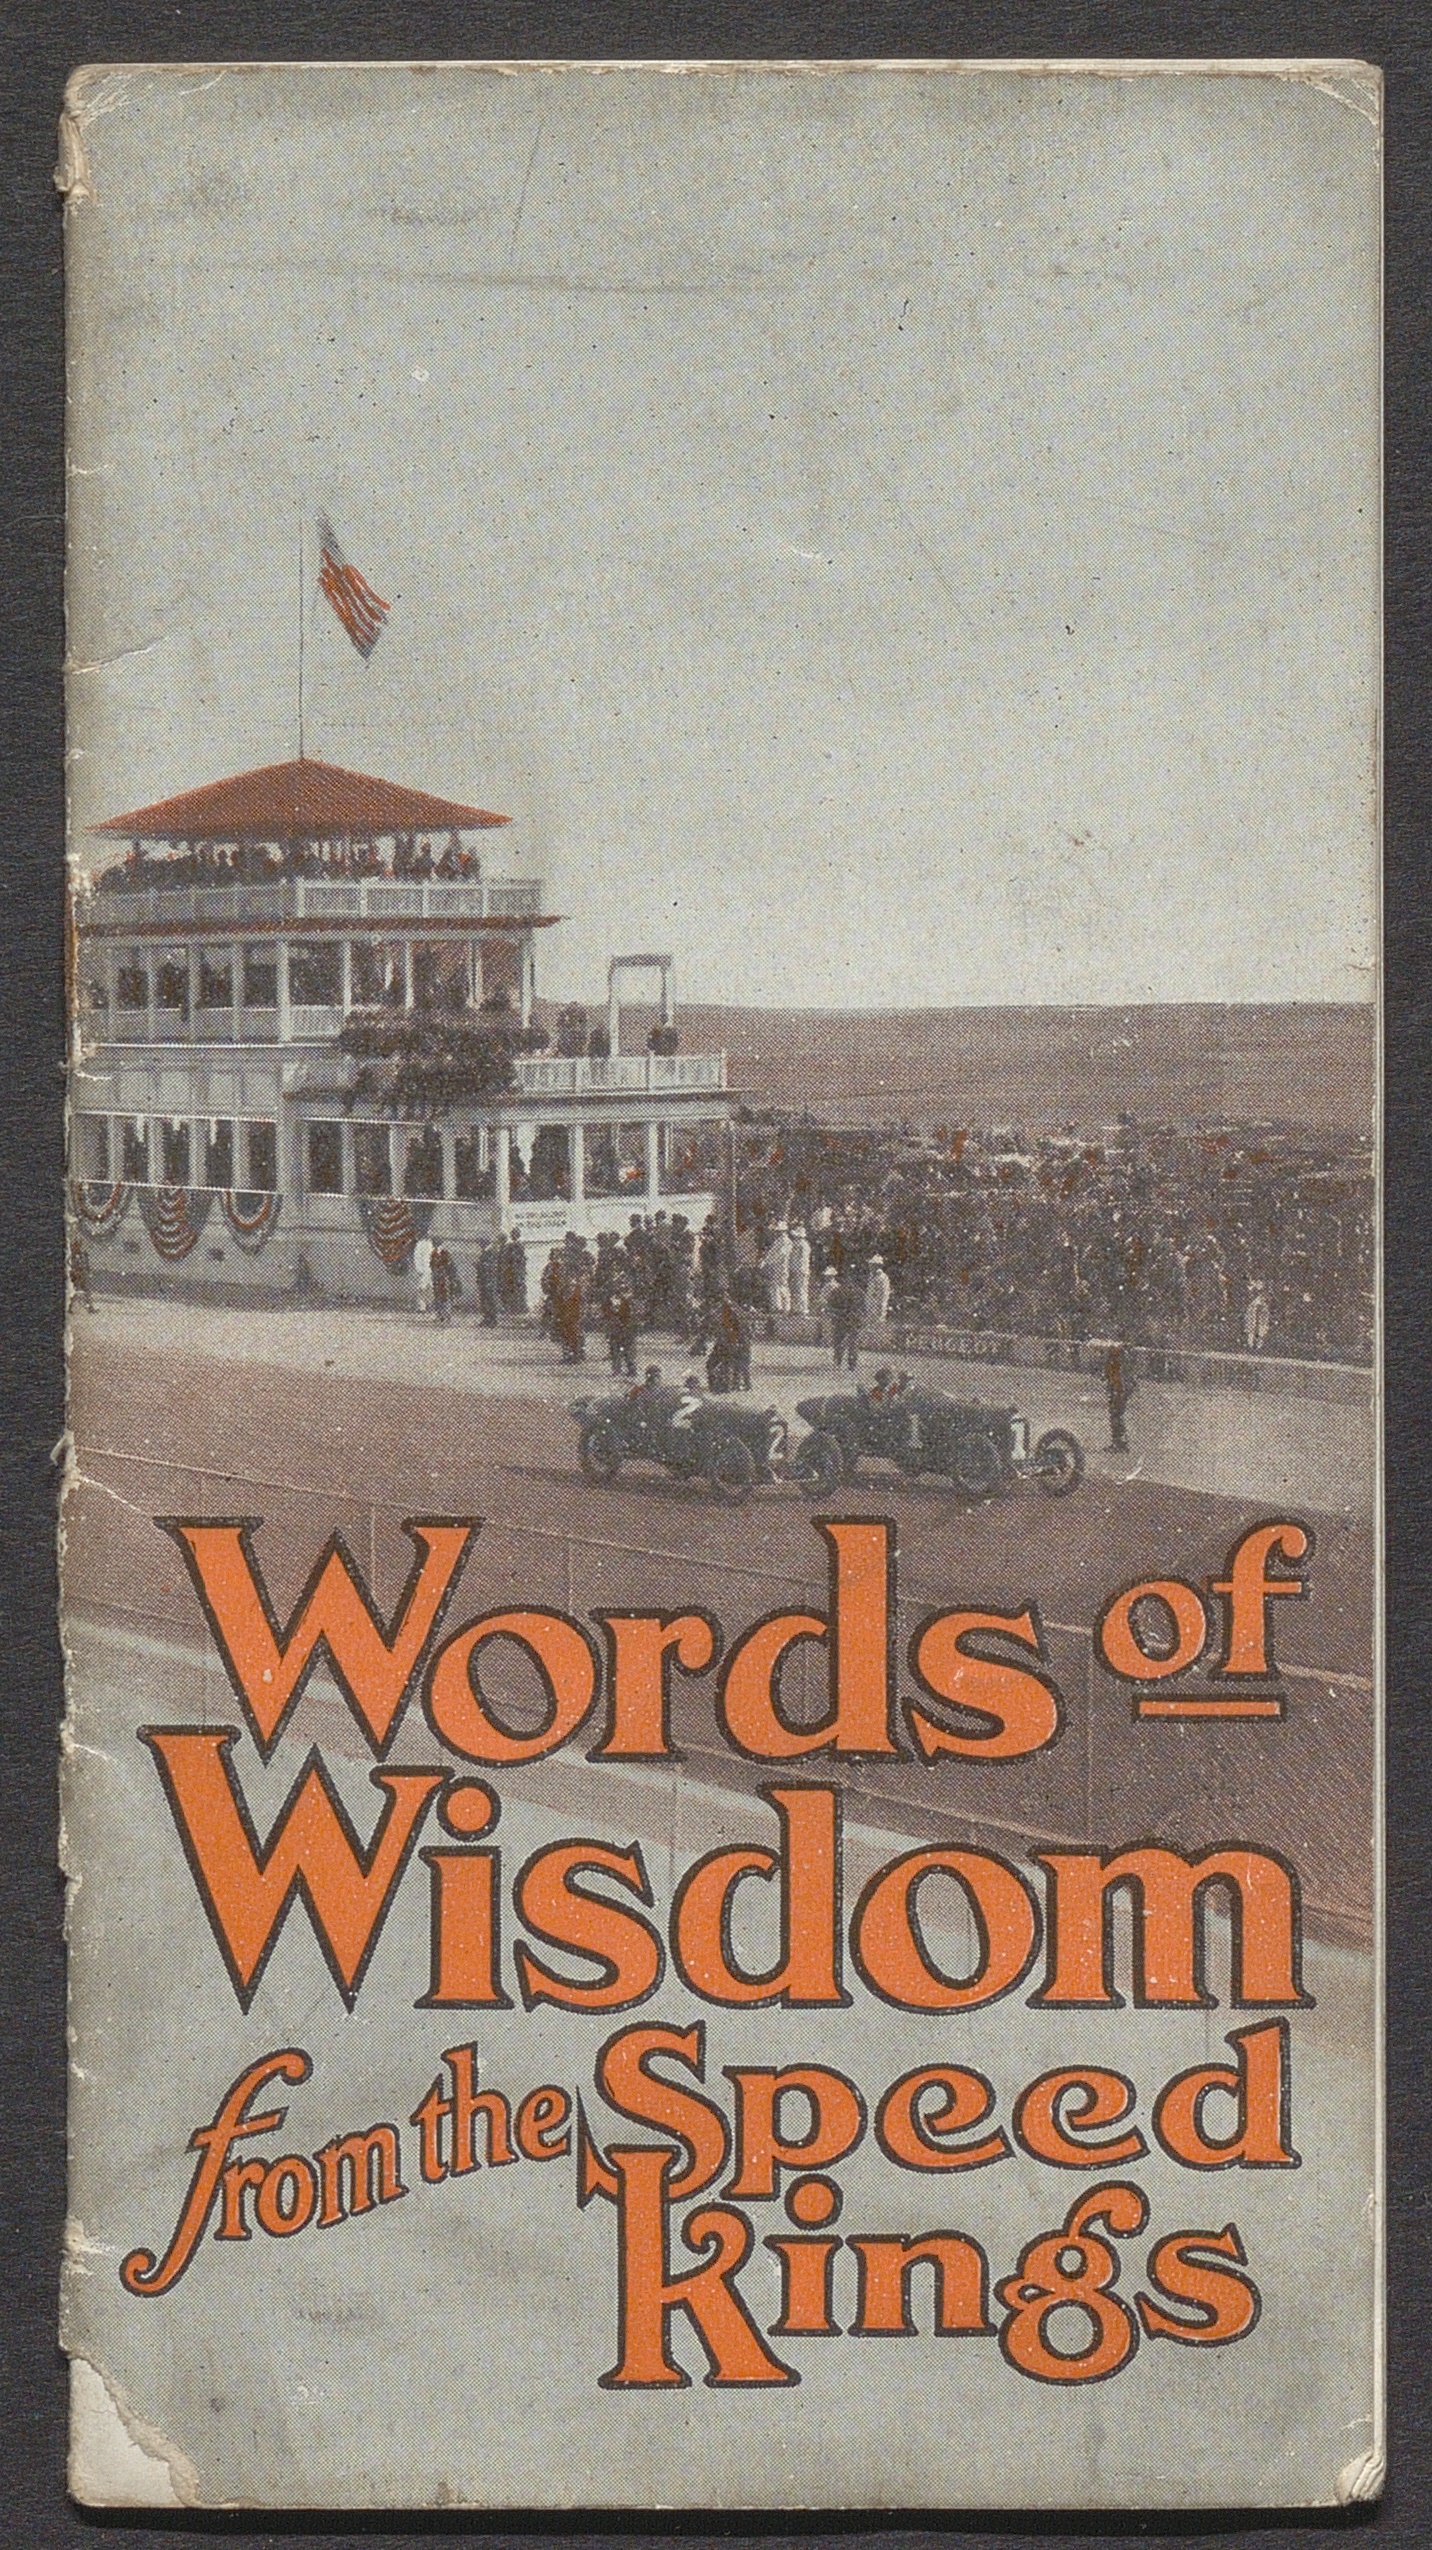 Pamphlet titled "Words of Wisdom from the Speed Kings". Photo cover shows a car race.